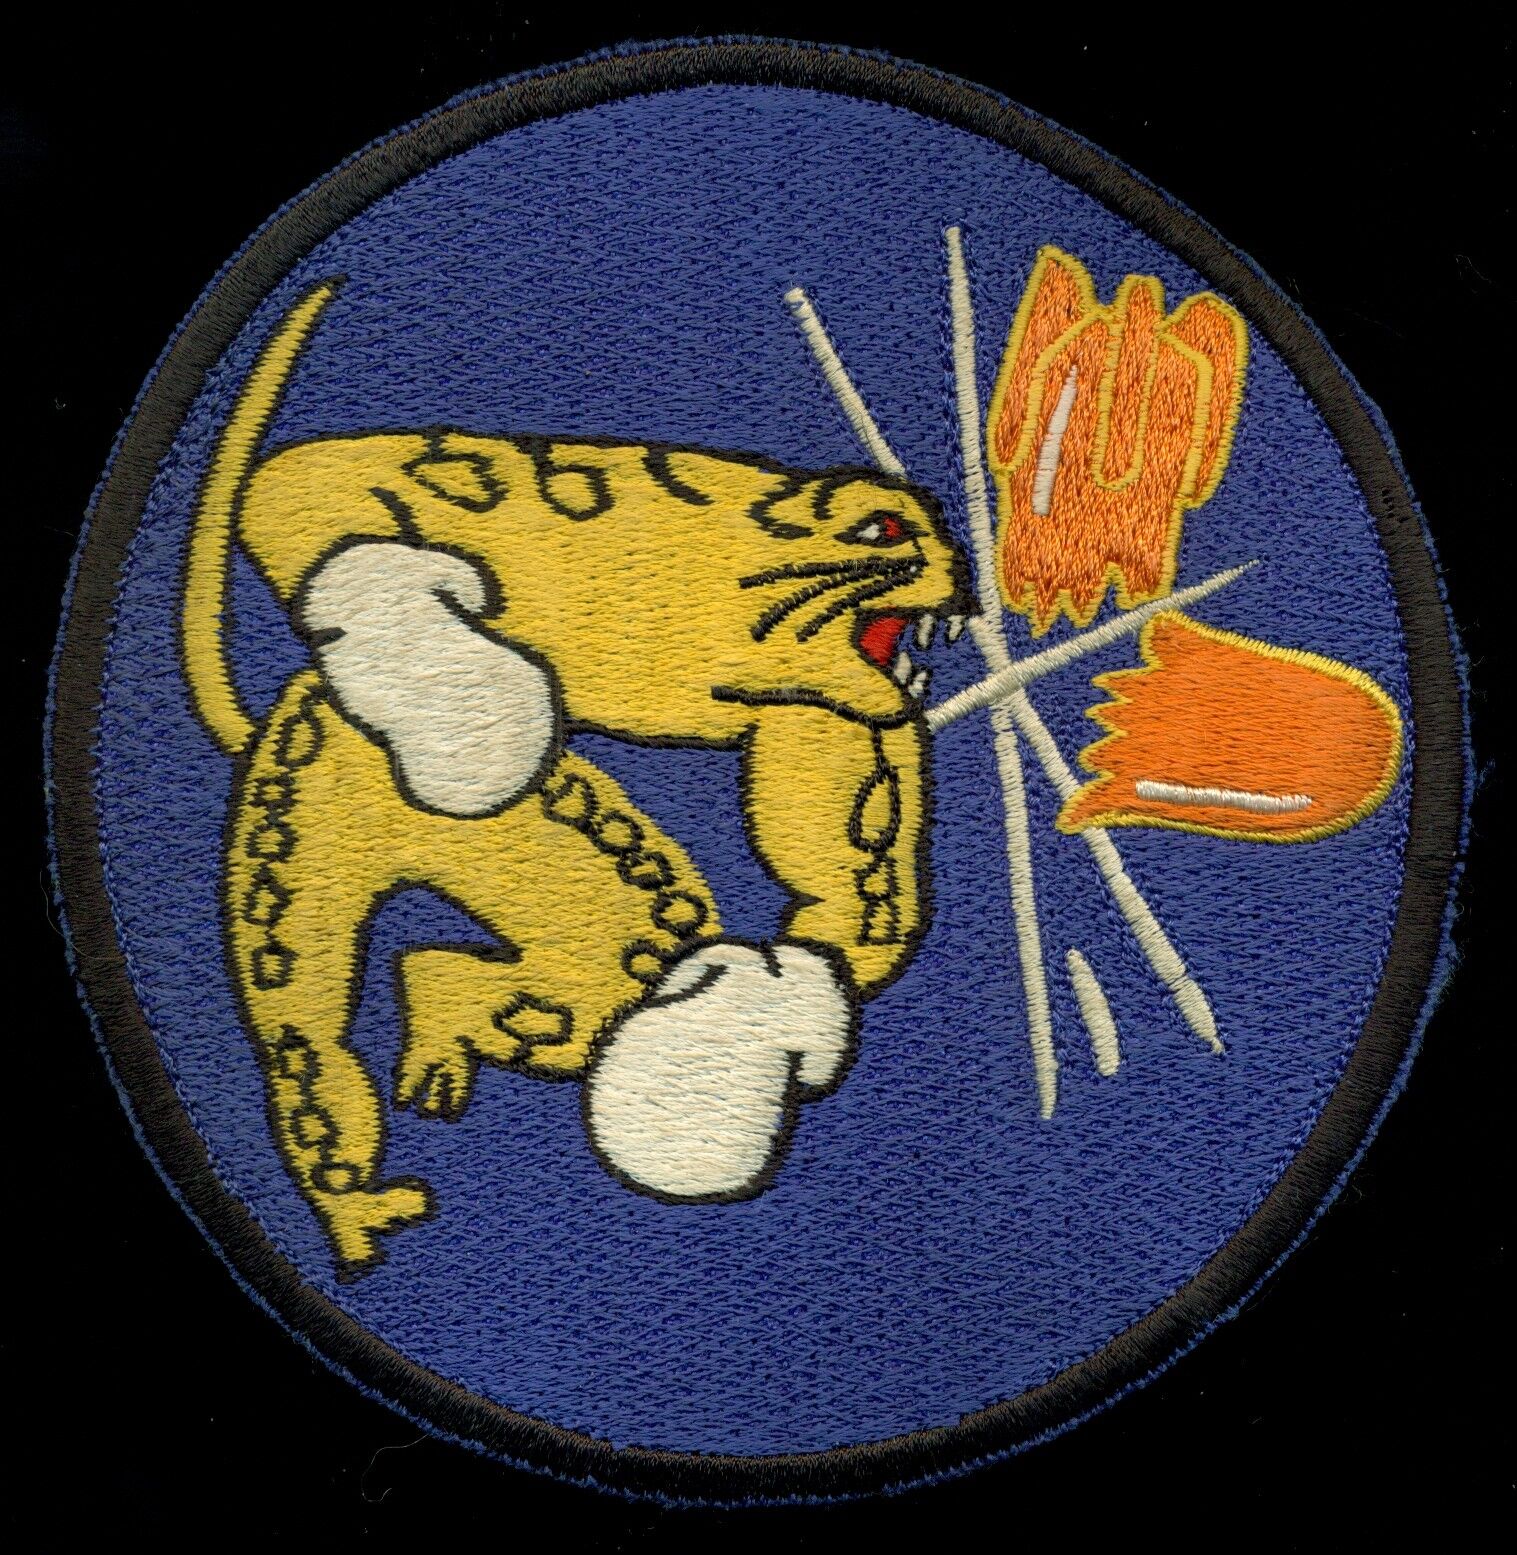 USAF 54th Fighter Interceptor Squadron Patch N-2